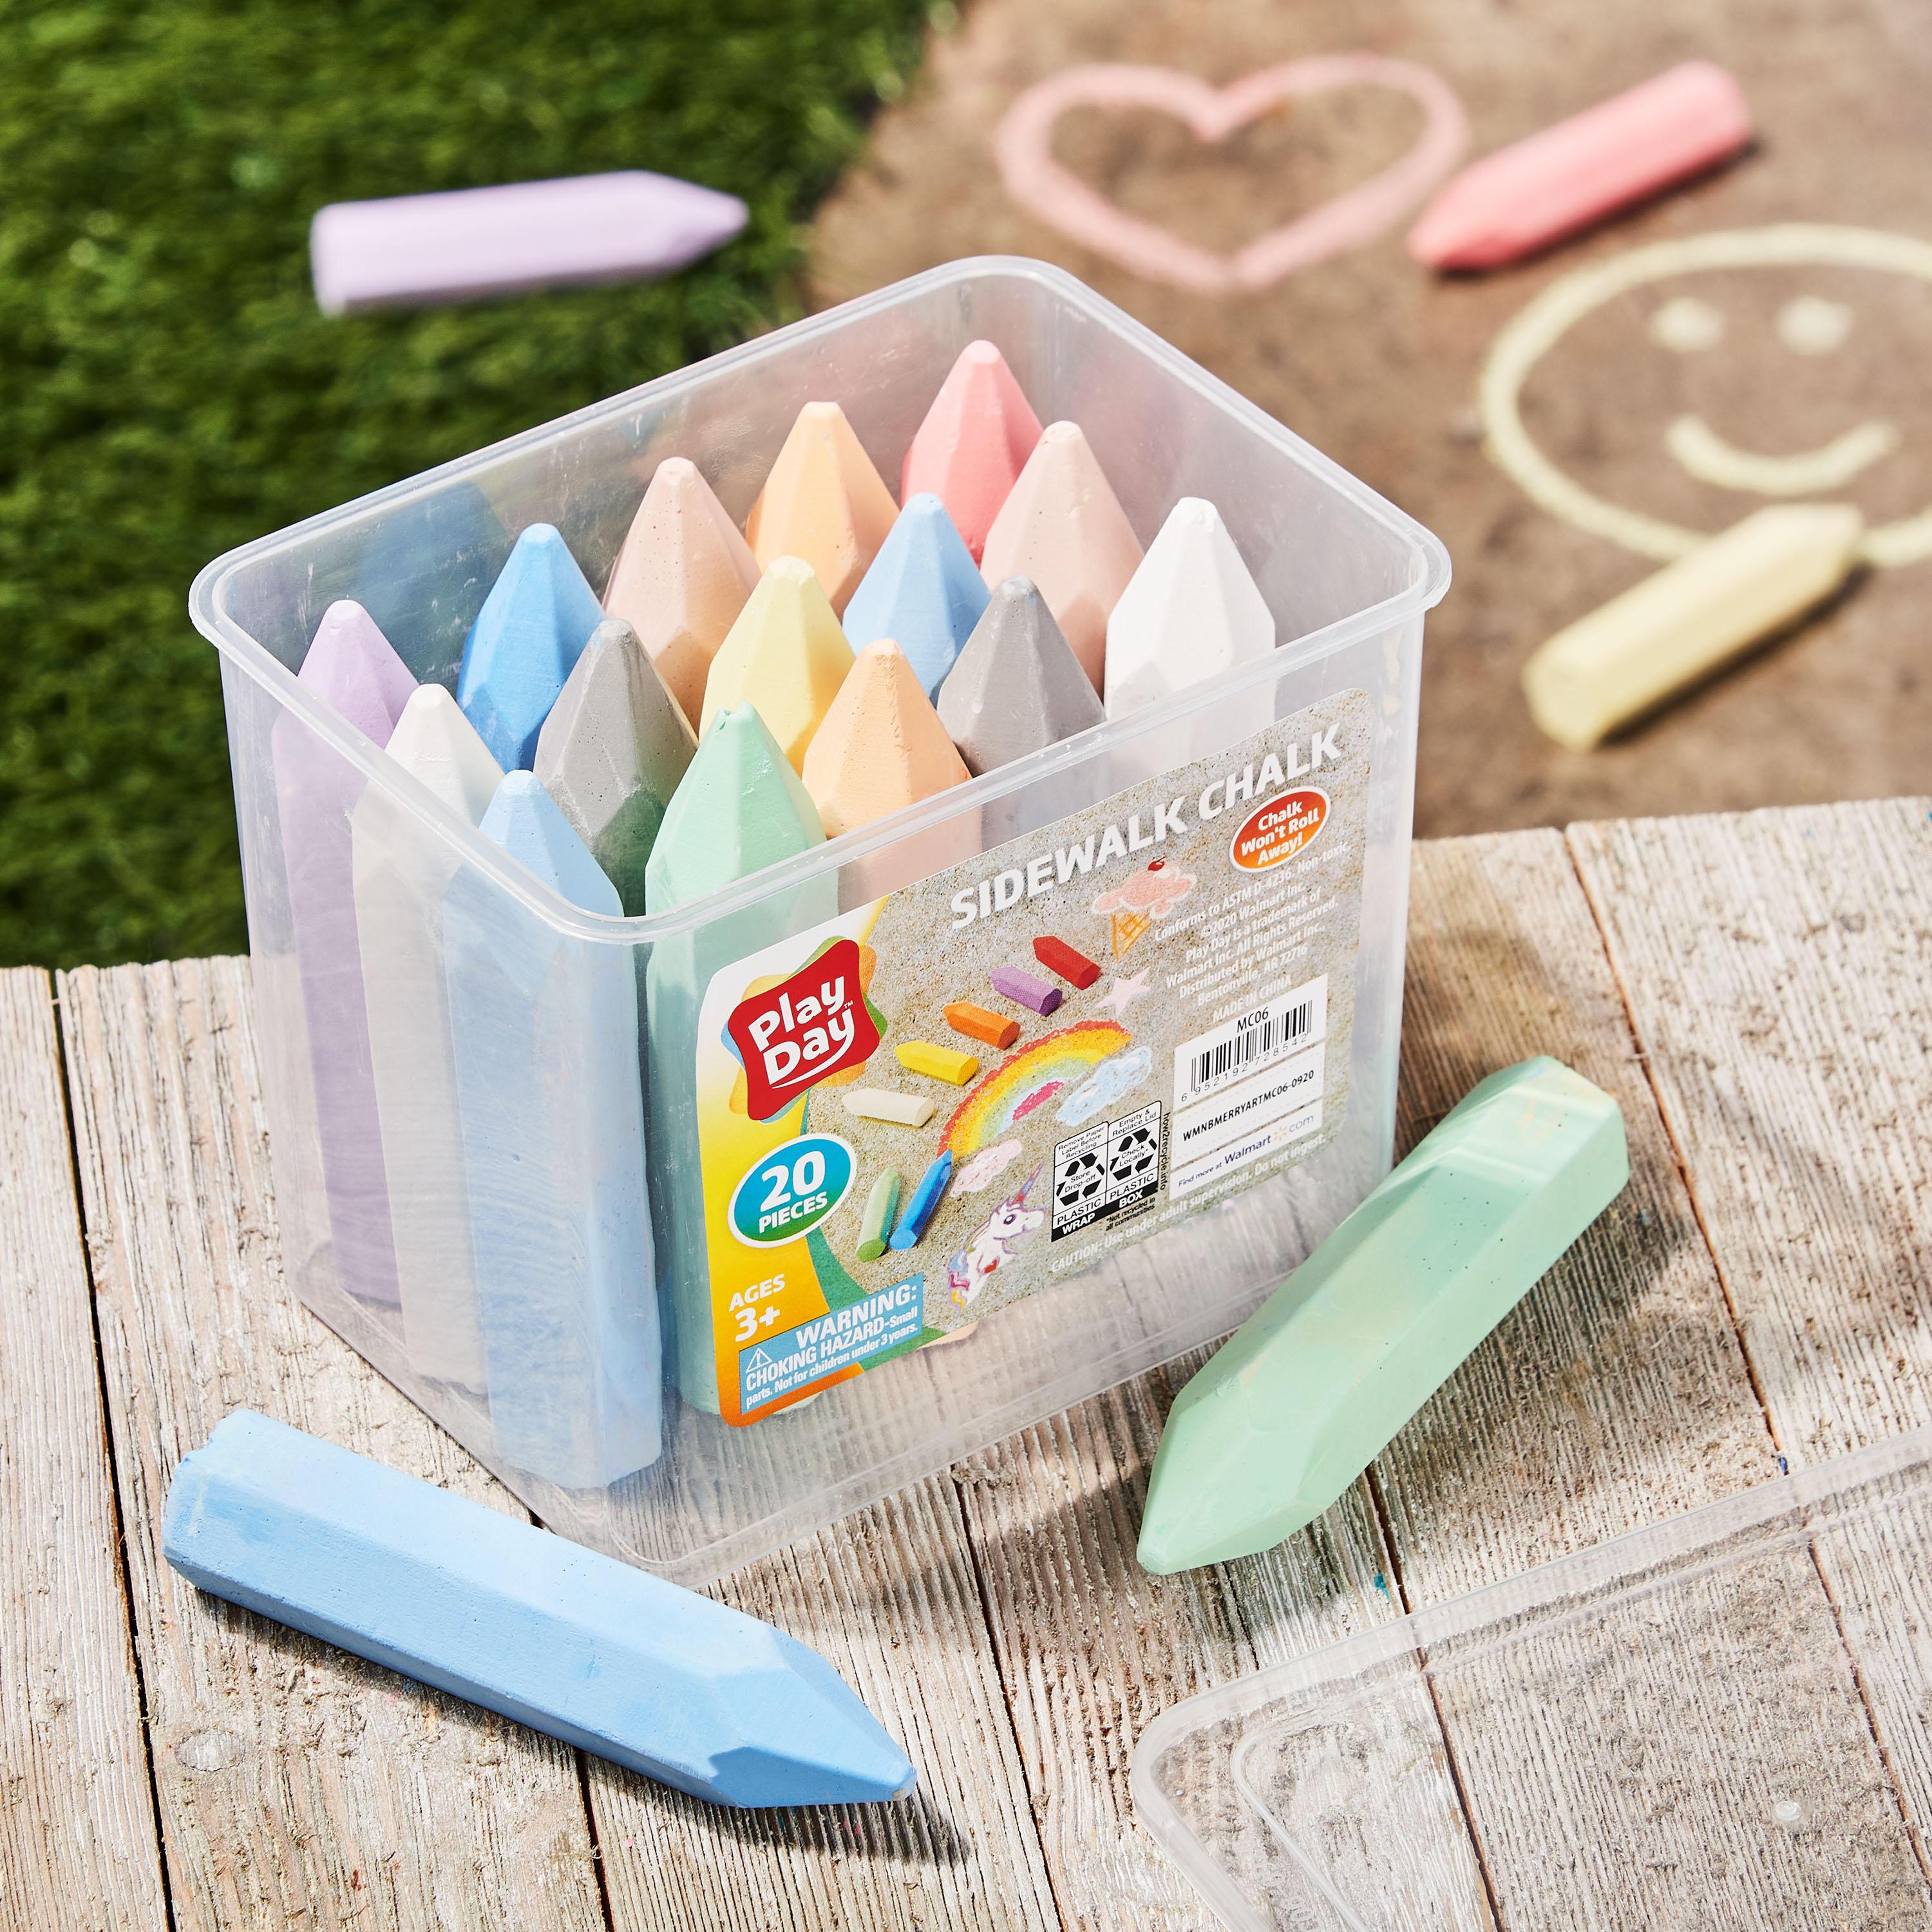 Play Day Sidewalk Chalk, 20 Pieces, Assorted Colors - image 2 of 5